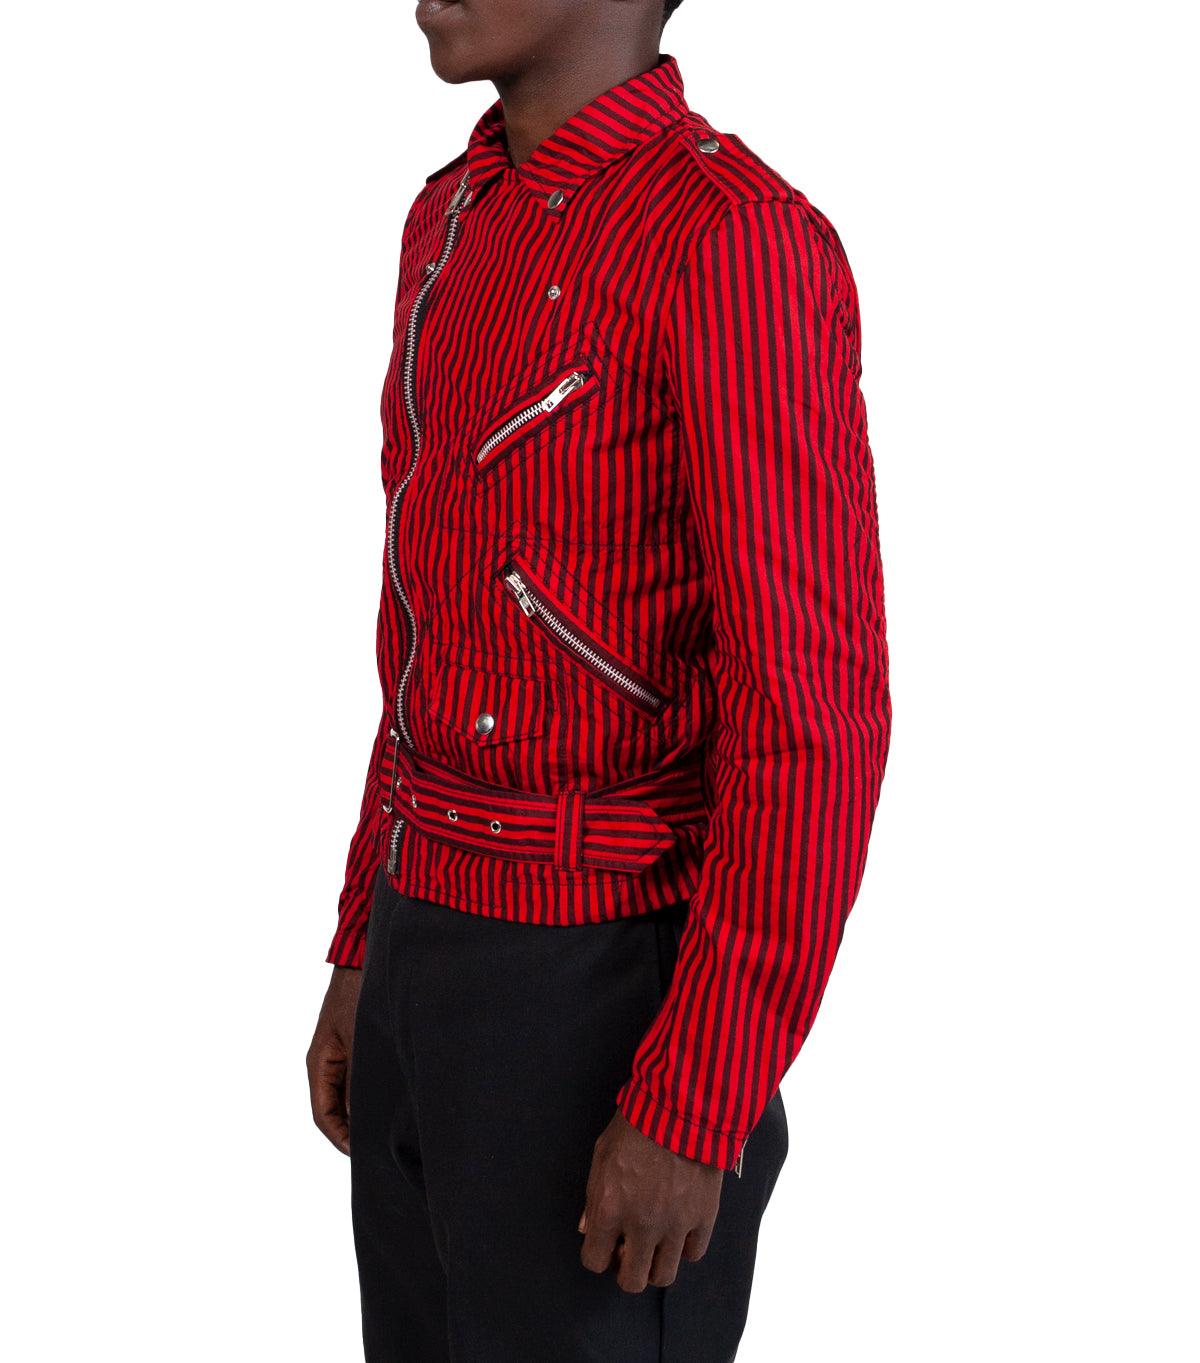 CdG SHIRT Striped Woven Jacket Red | SOMEWHERE